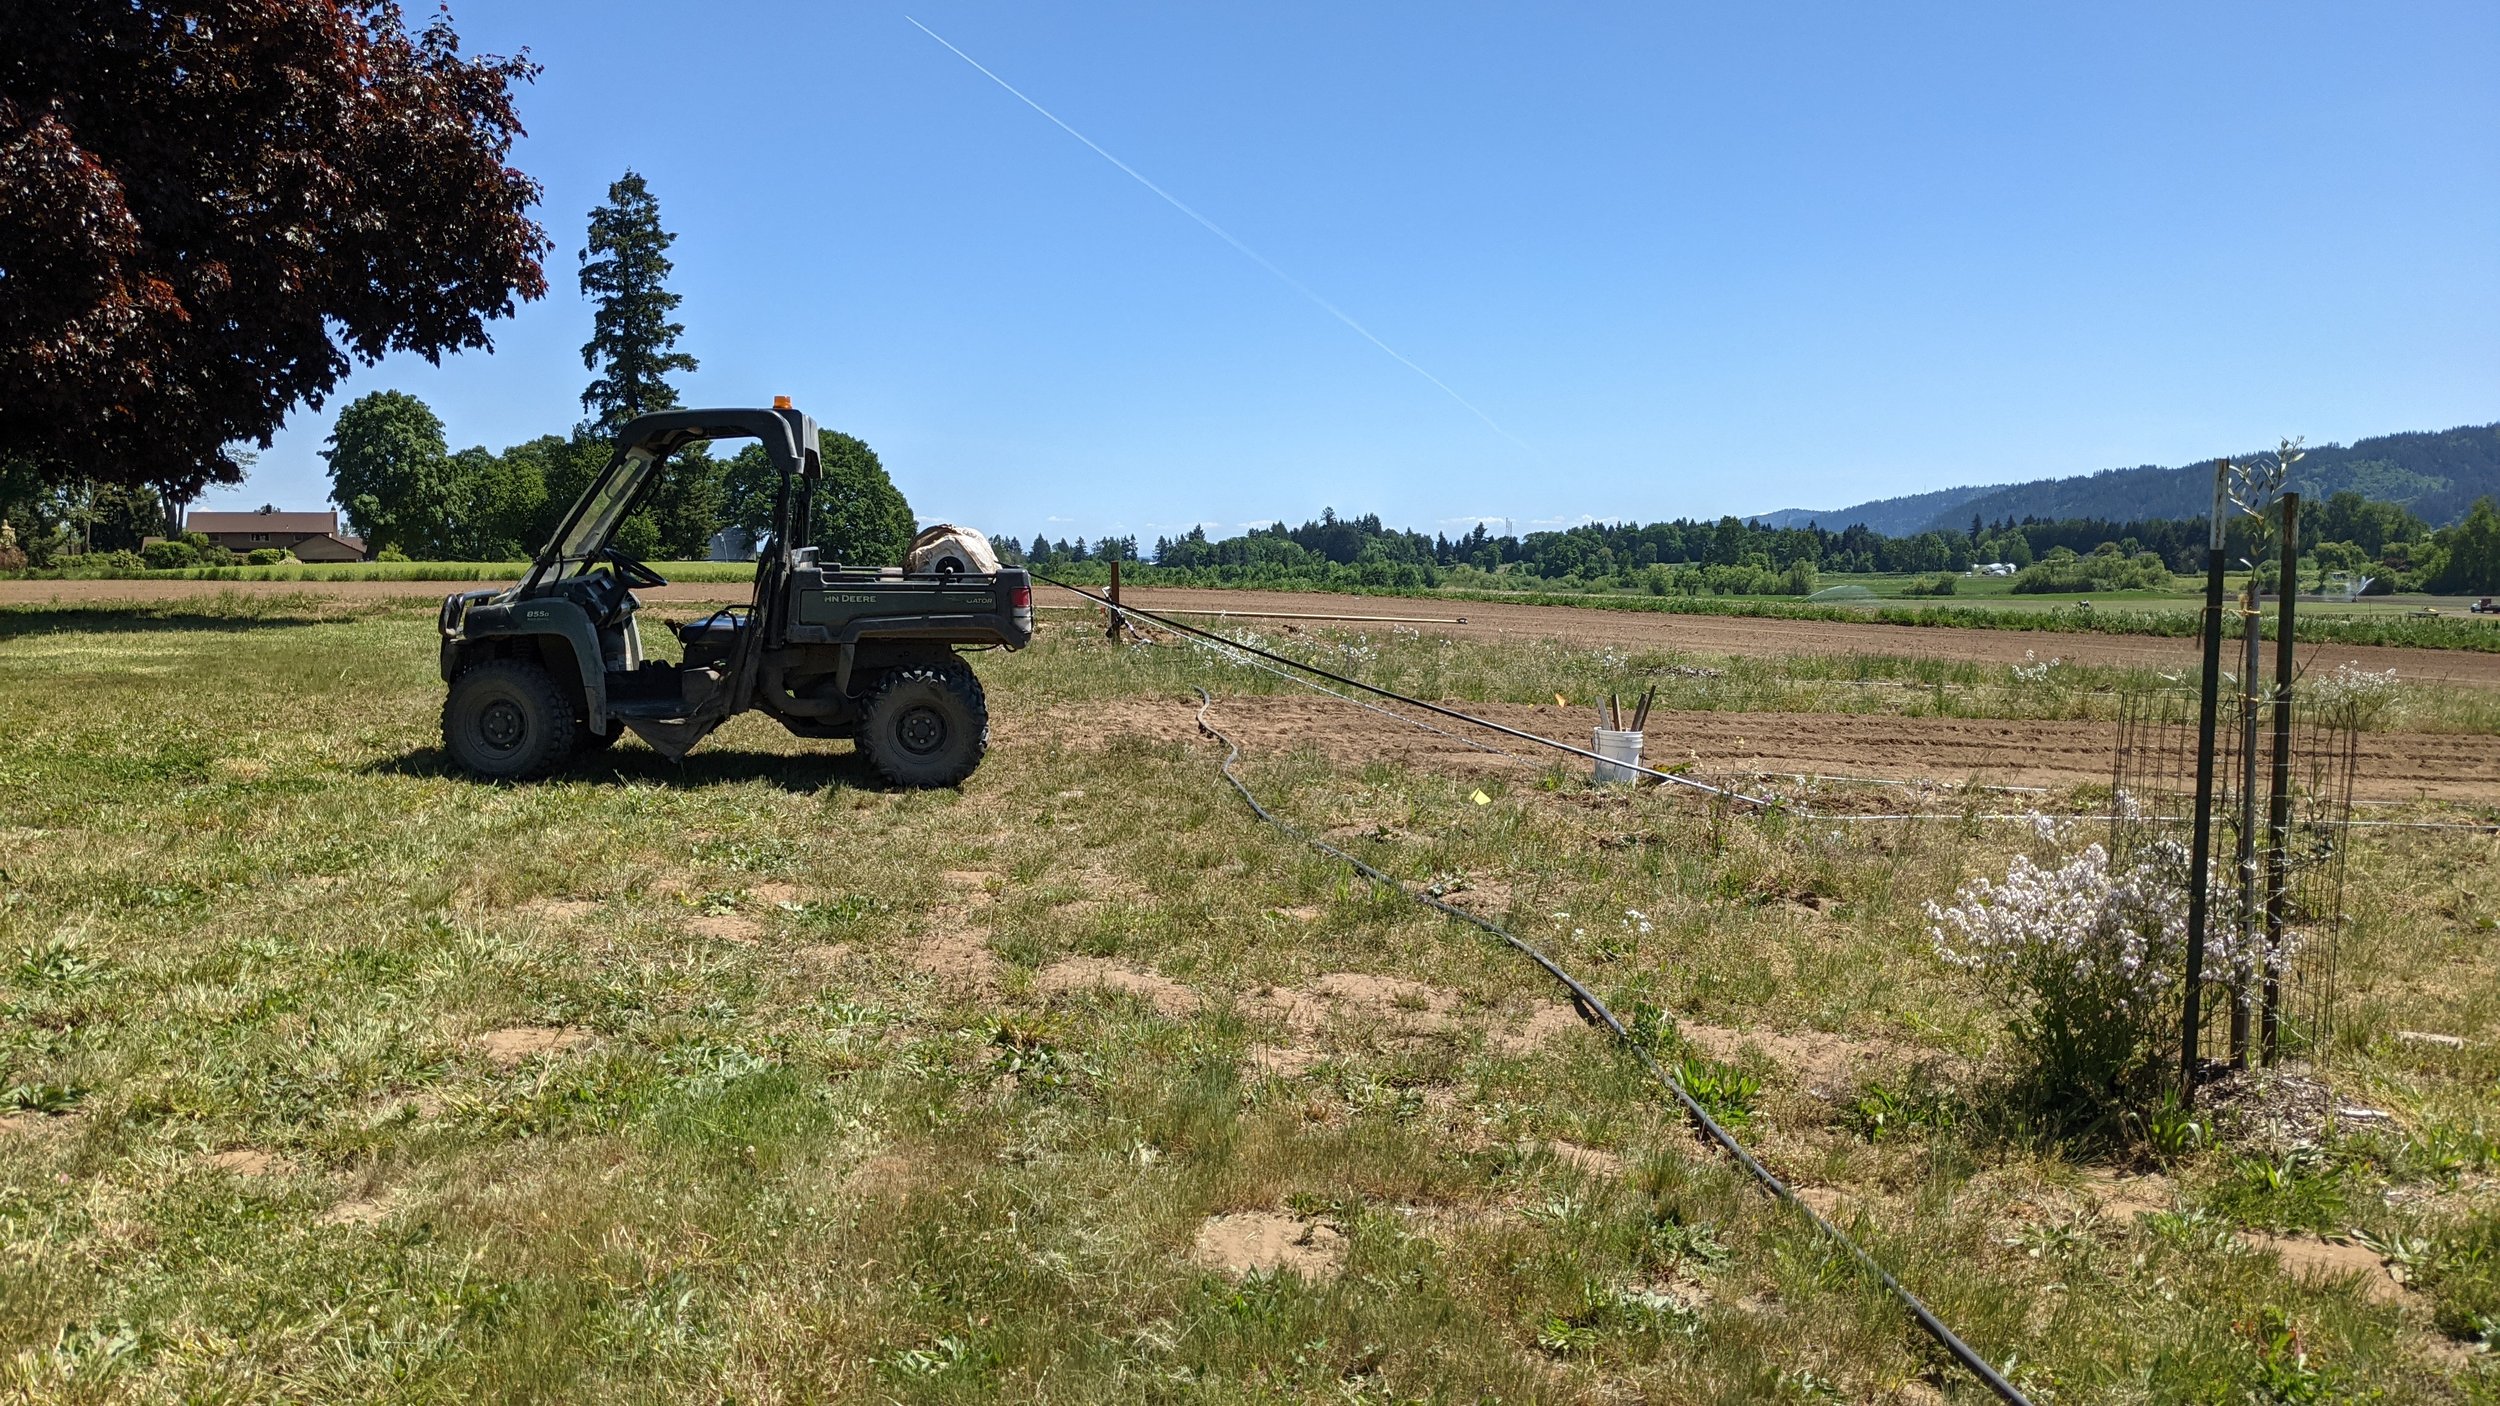  We have been adding more and more drip line to different fields on the farm. The drip lines really helped our greens and tomatoes this year. 